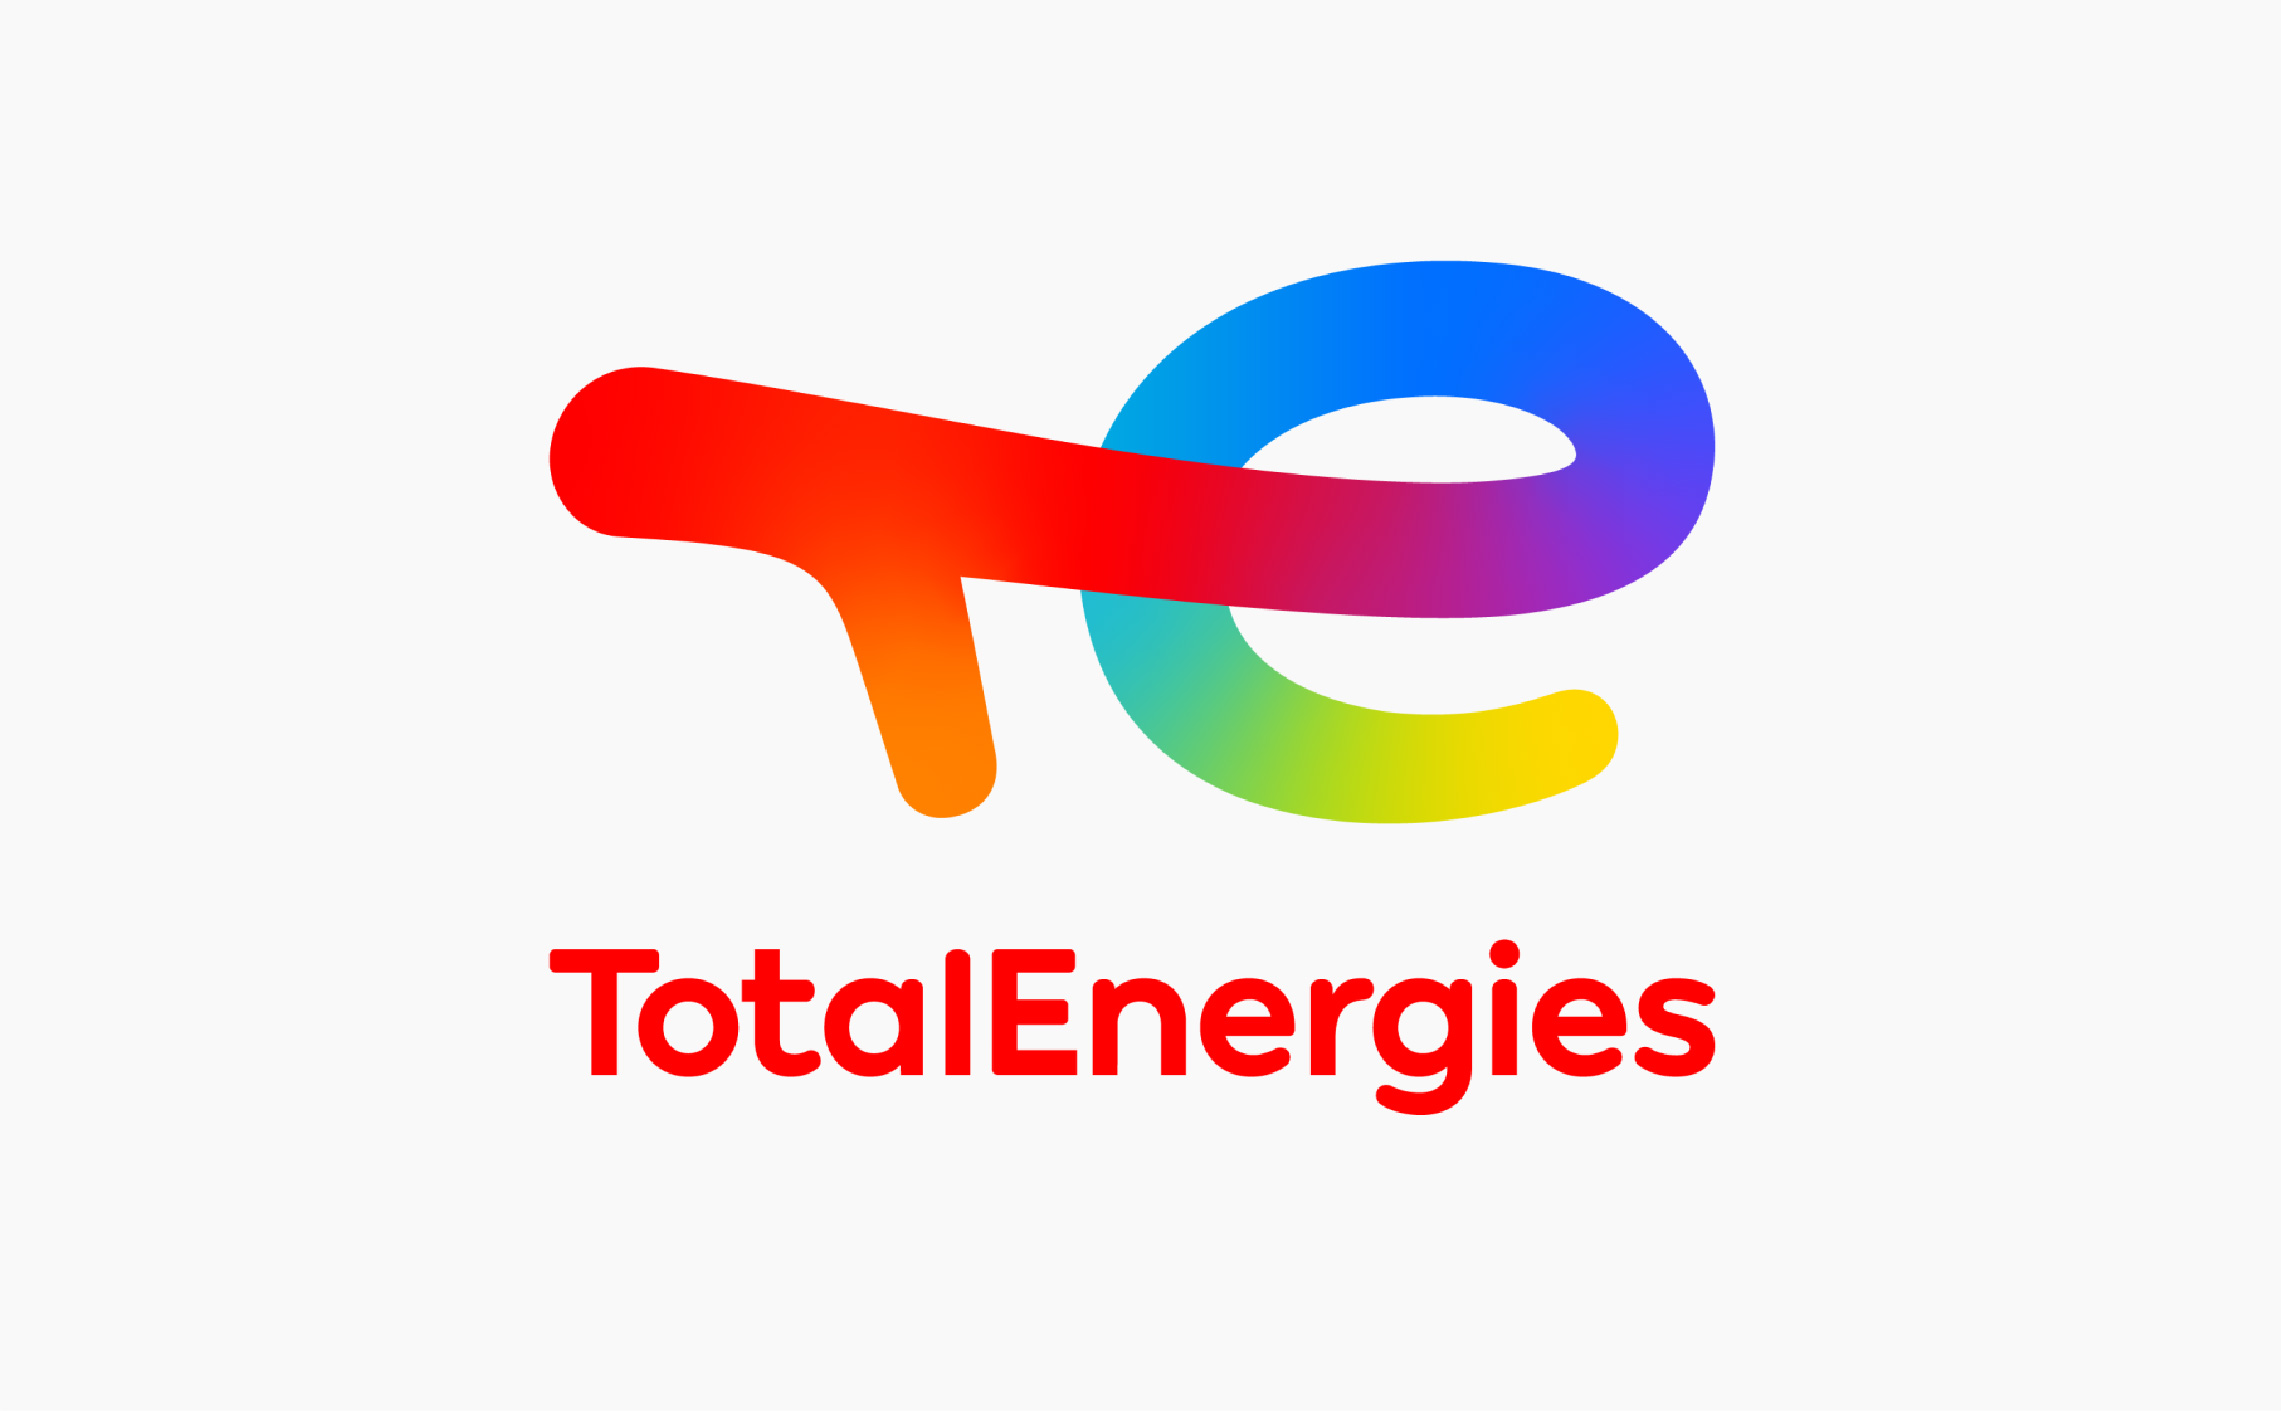 Project Manager at TotalEnergies